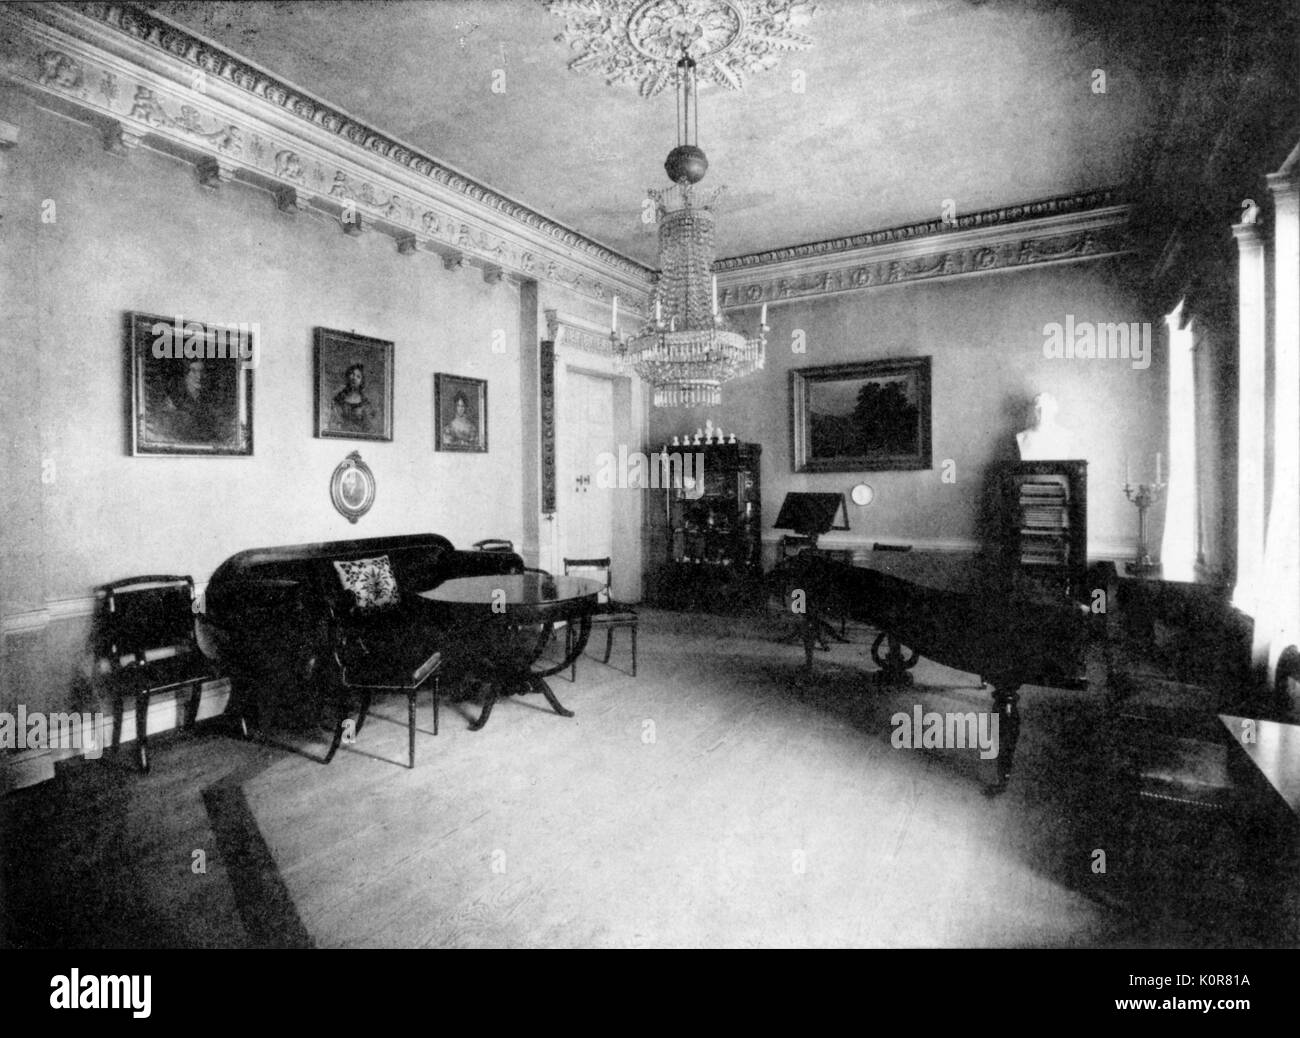 SPOHR, Louis - his Music Room in his home German composer and violinist (1784-1859) Stock Photo